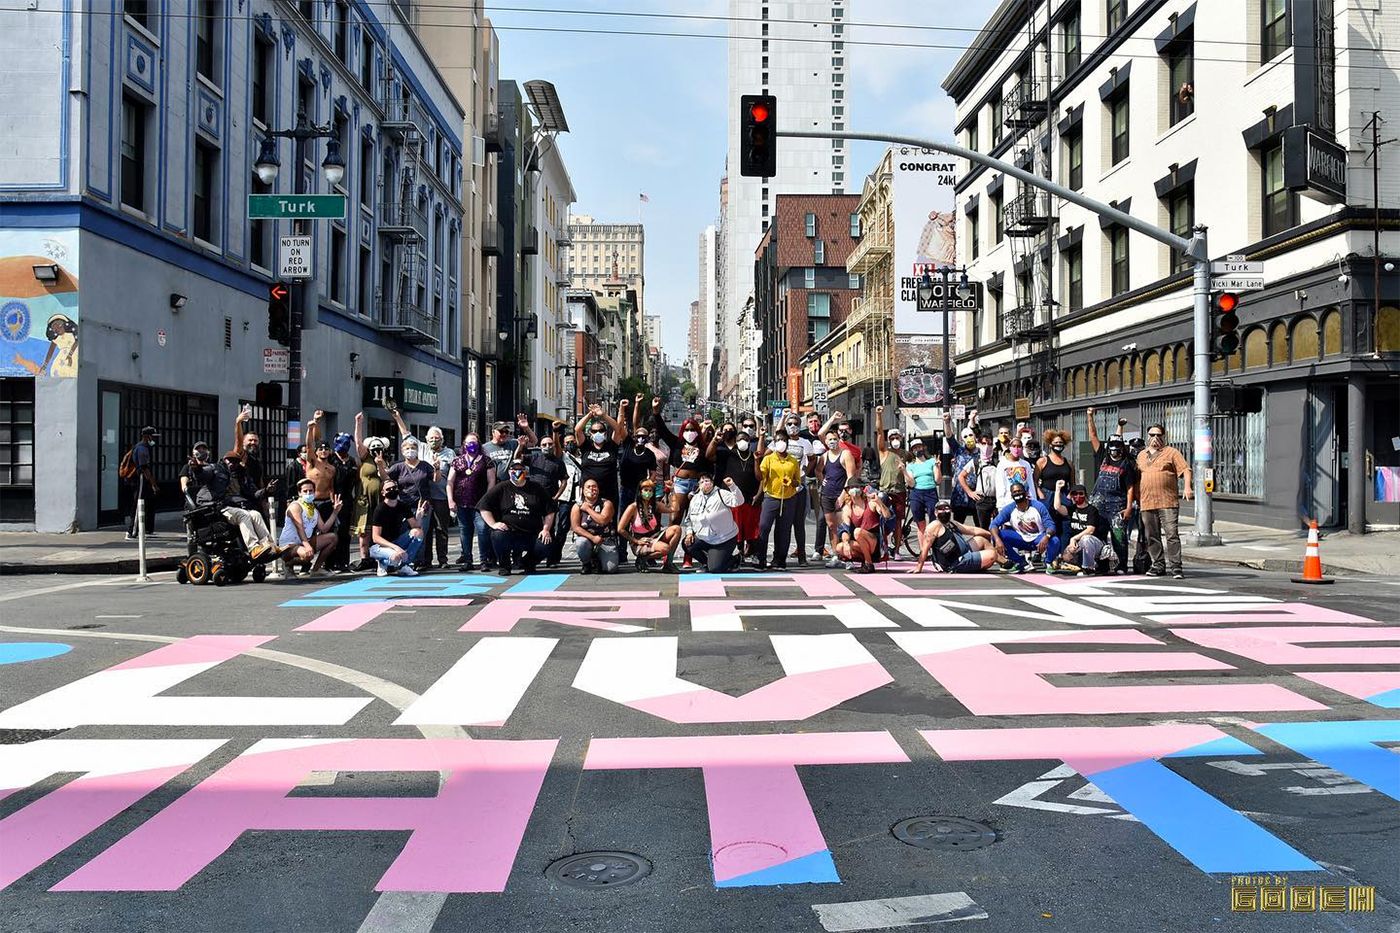 Photo shows crowd of supporters posing by "Black Trans Lives Matter" street mural